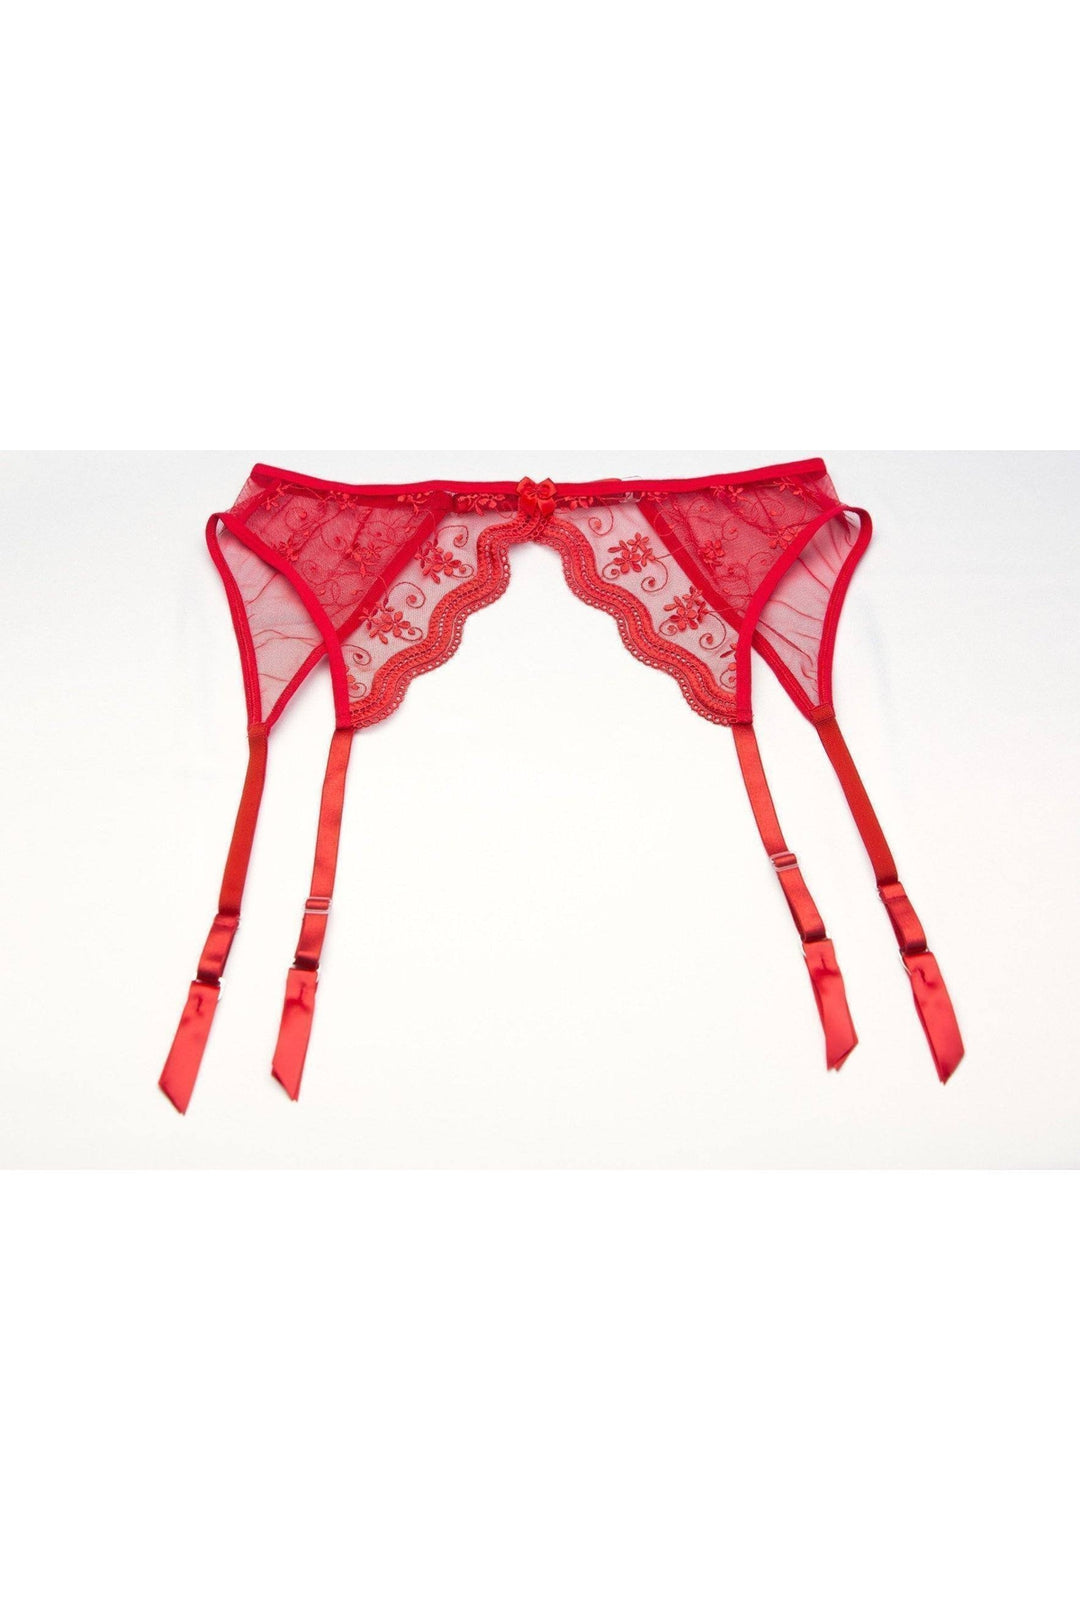 Scalloped Embroidered Garter belt | Plus Size-Intimate Attitudes-SEXYSHOES.COM